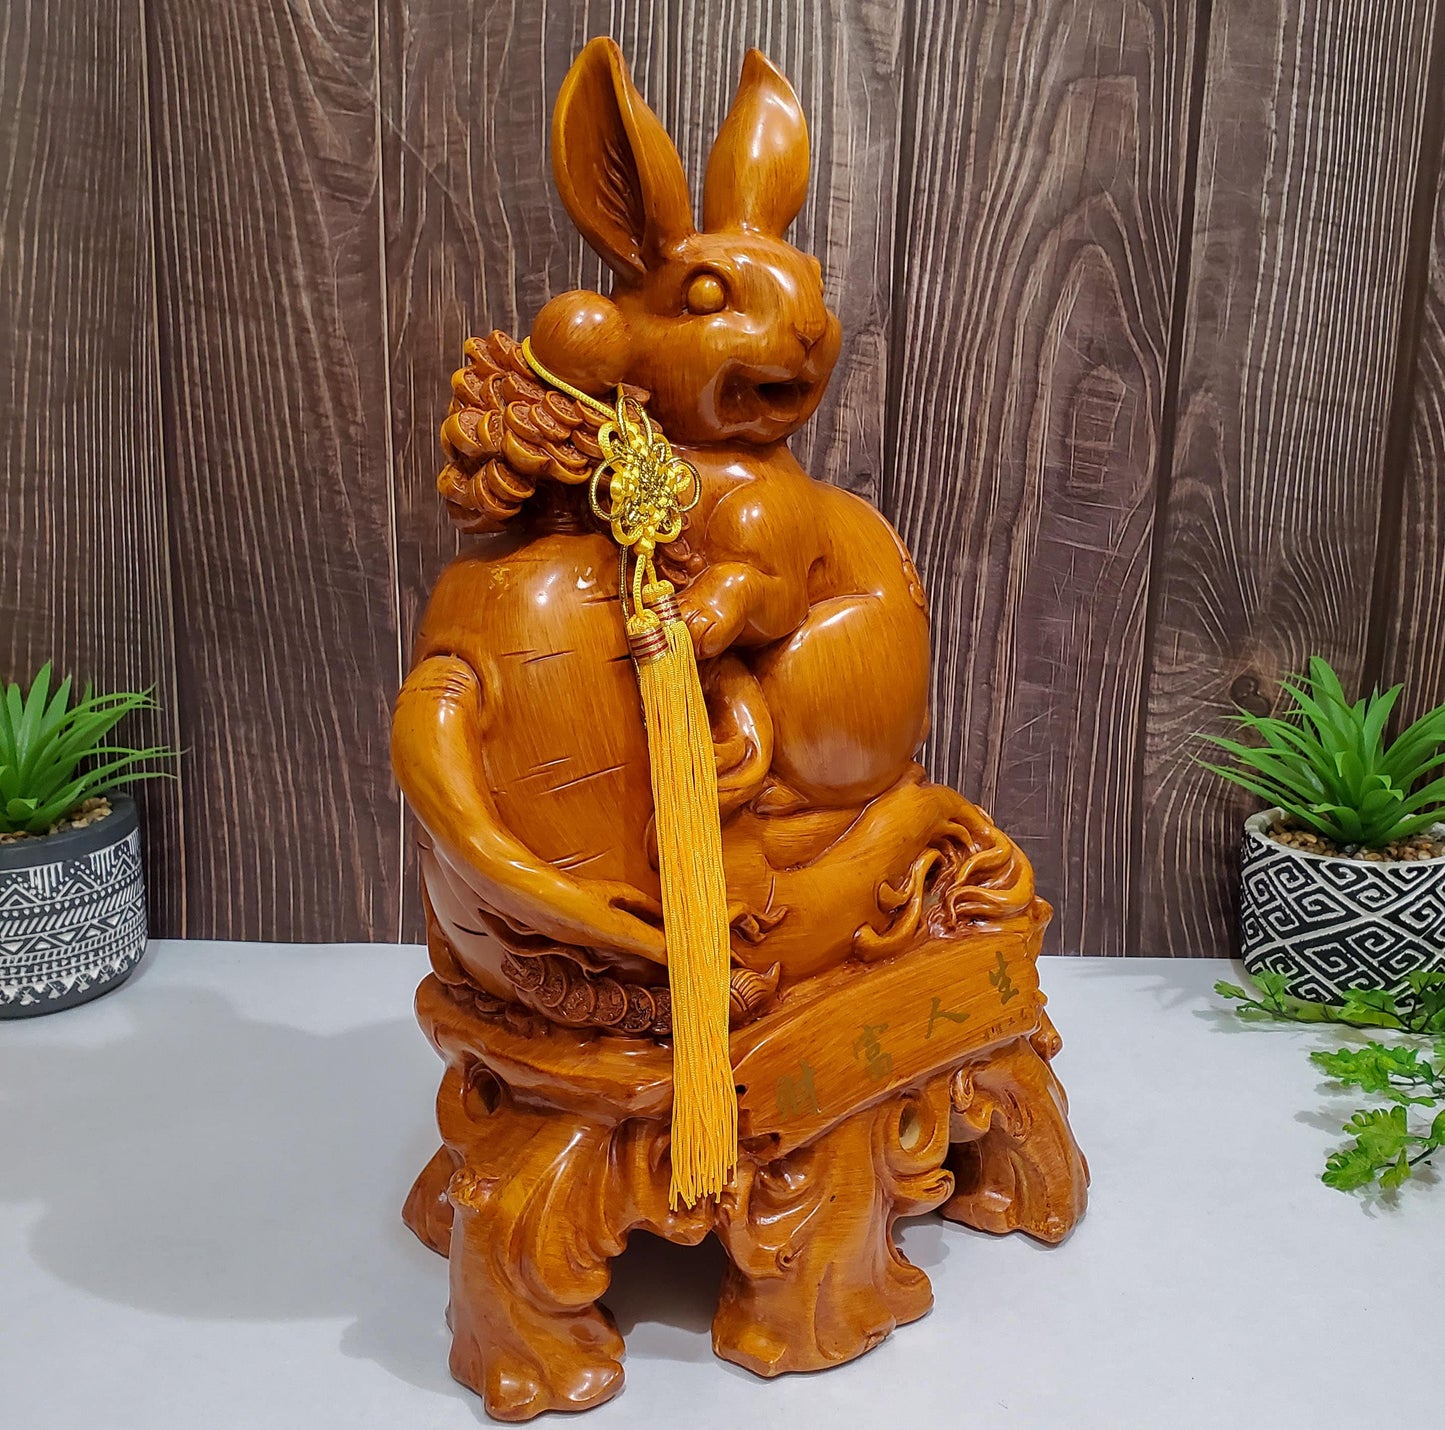 Vintage Chinese Feng Shui Lucky Wealth Rabbit Resin Wood-like Statue Sculpture for Home or Office 16.5" Tall